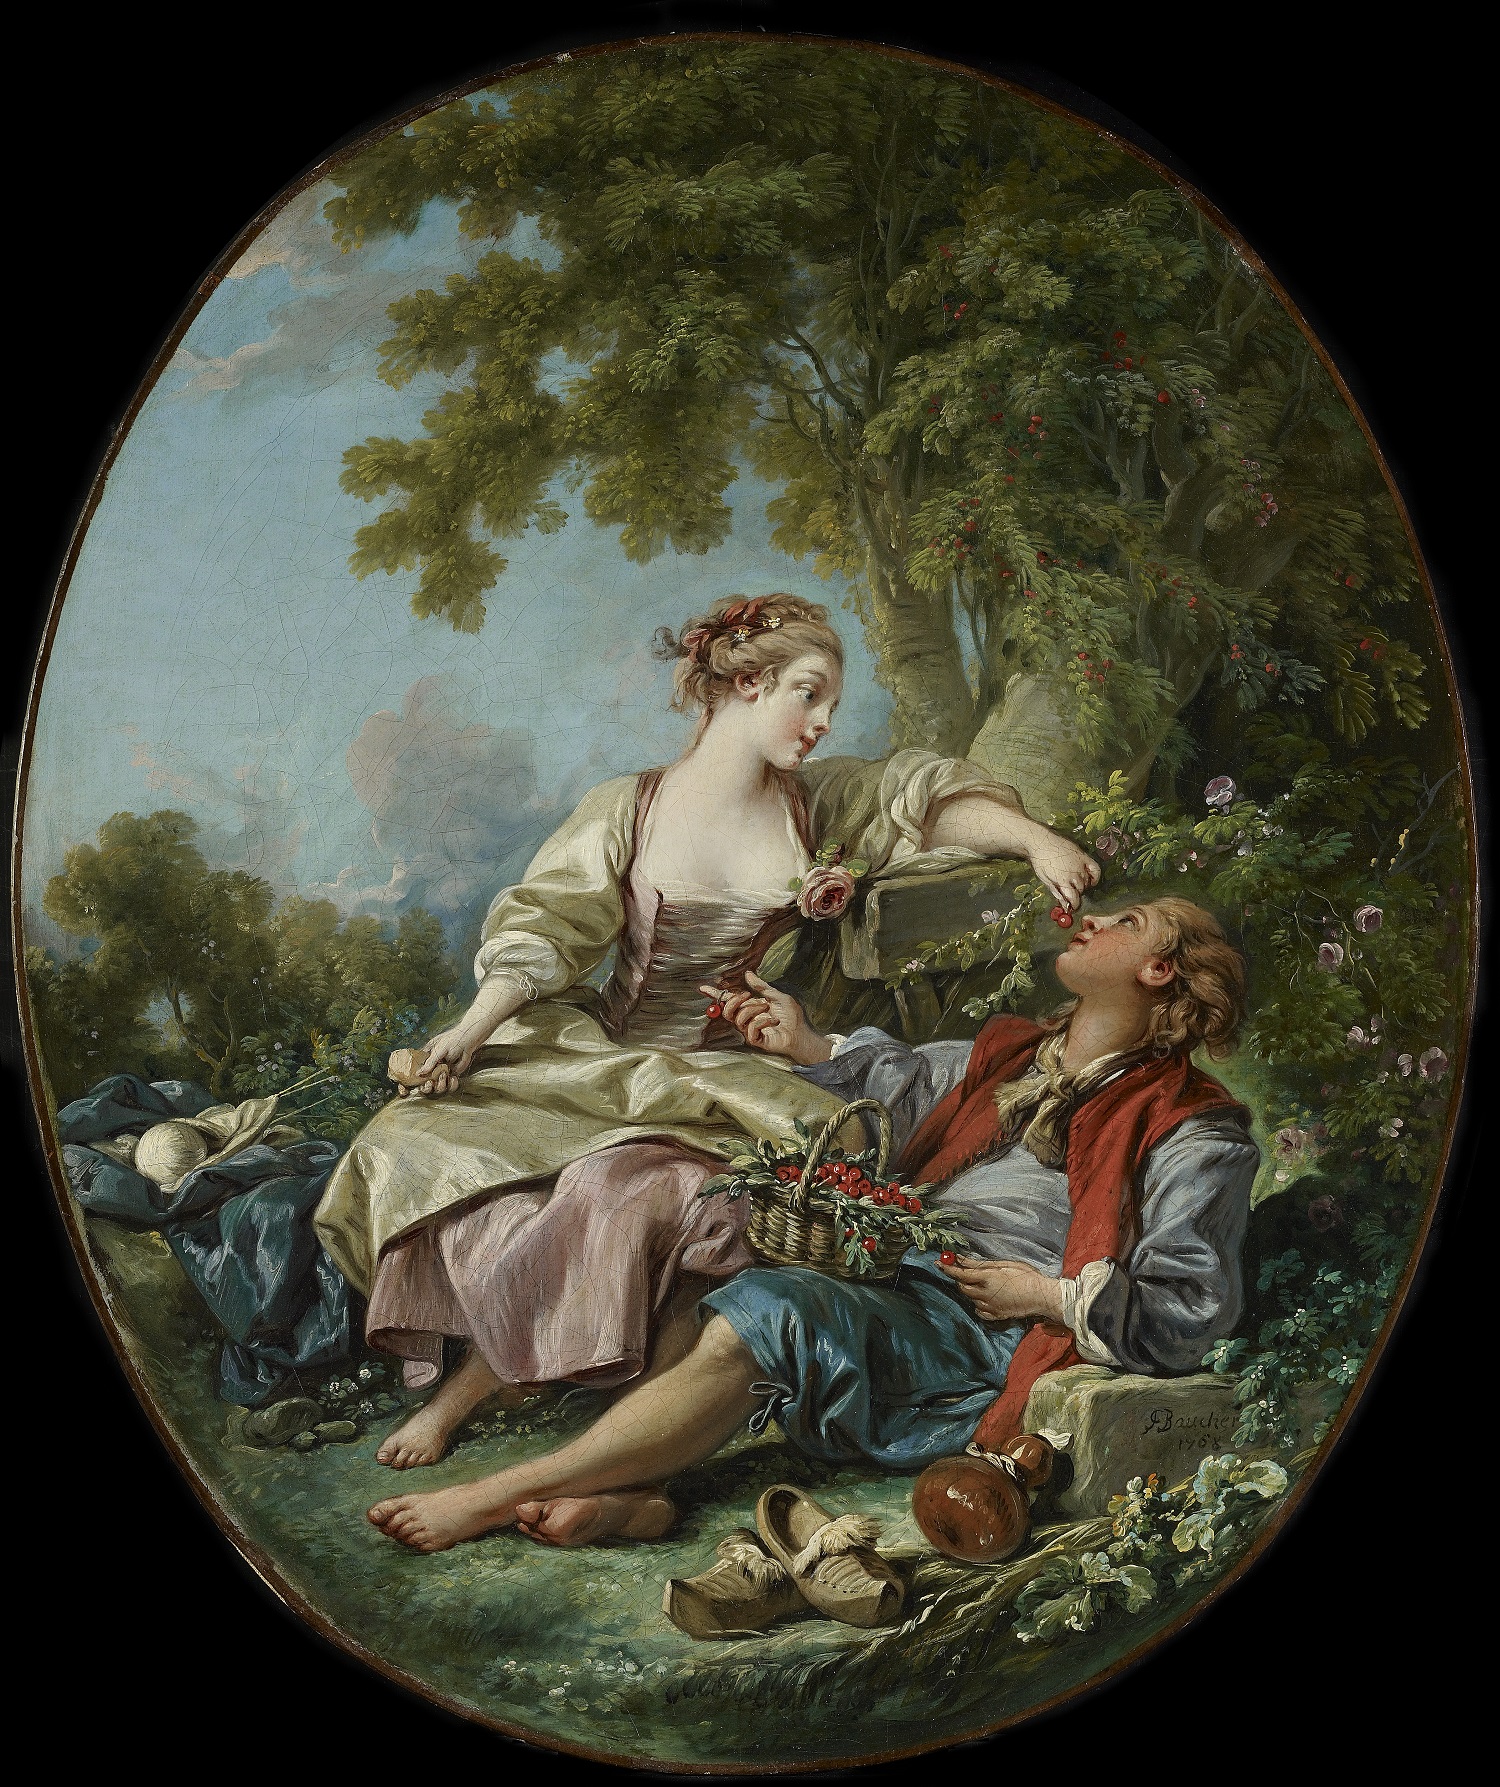 A painting of a man and woman reclining in a bush